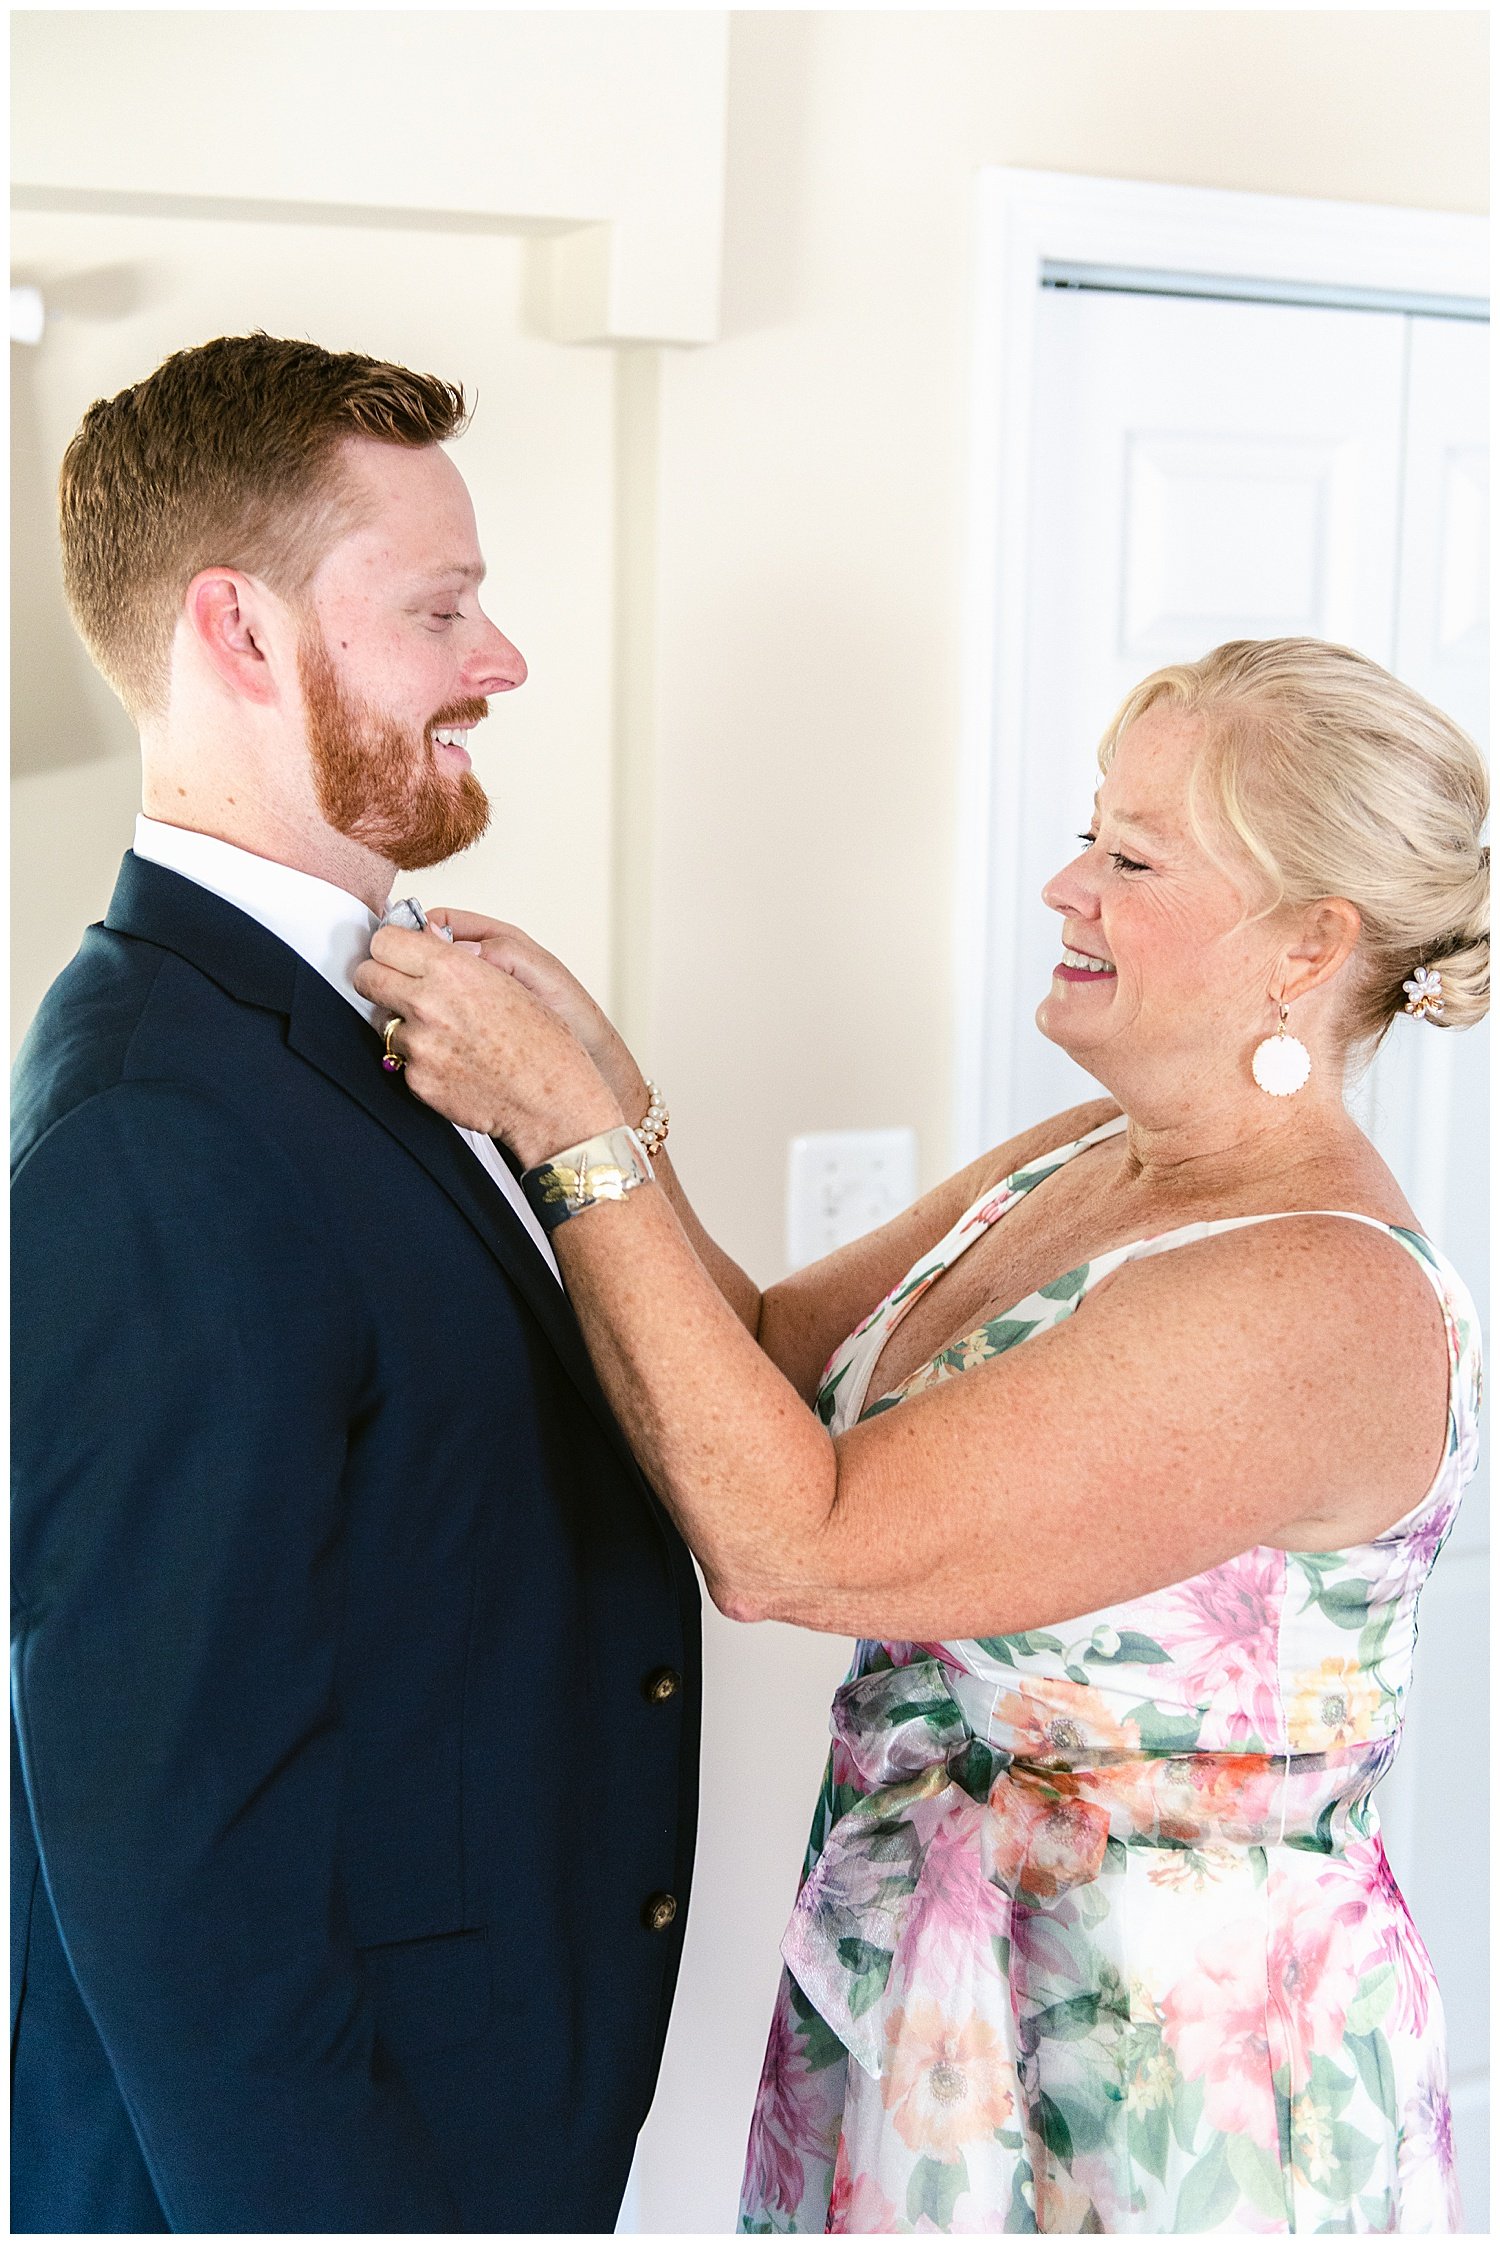 mother of the groom putting his bow tie on